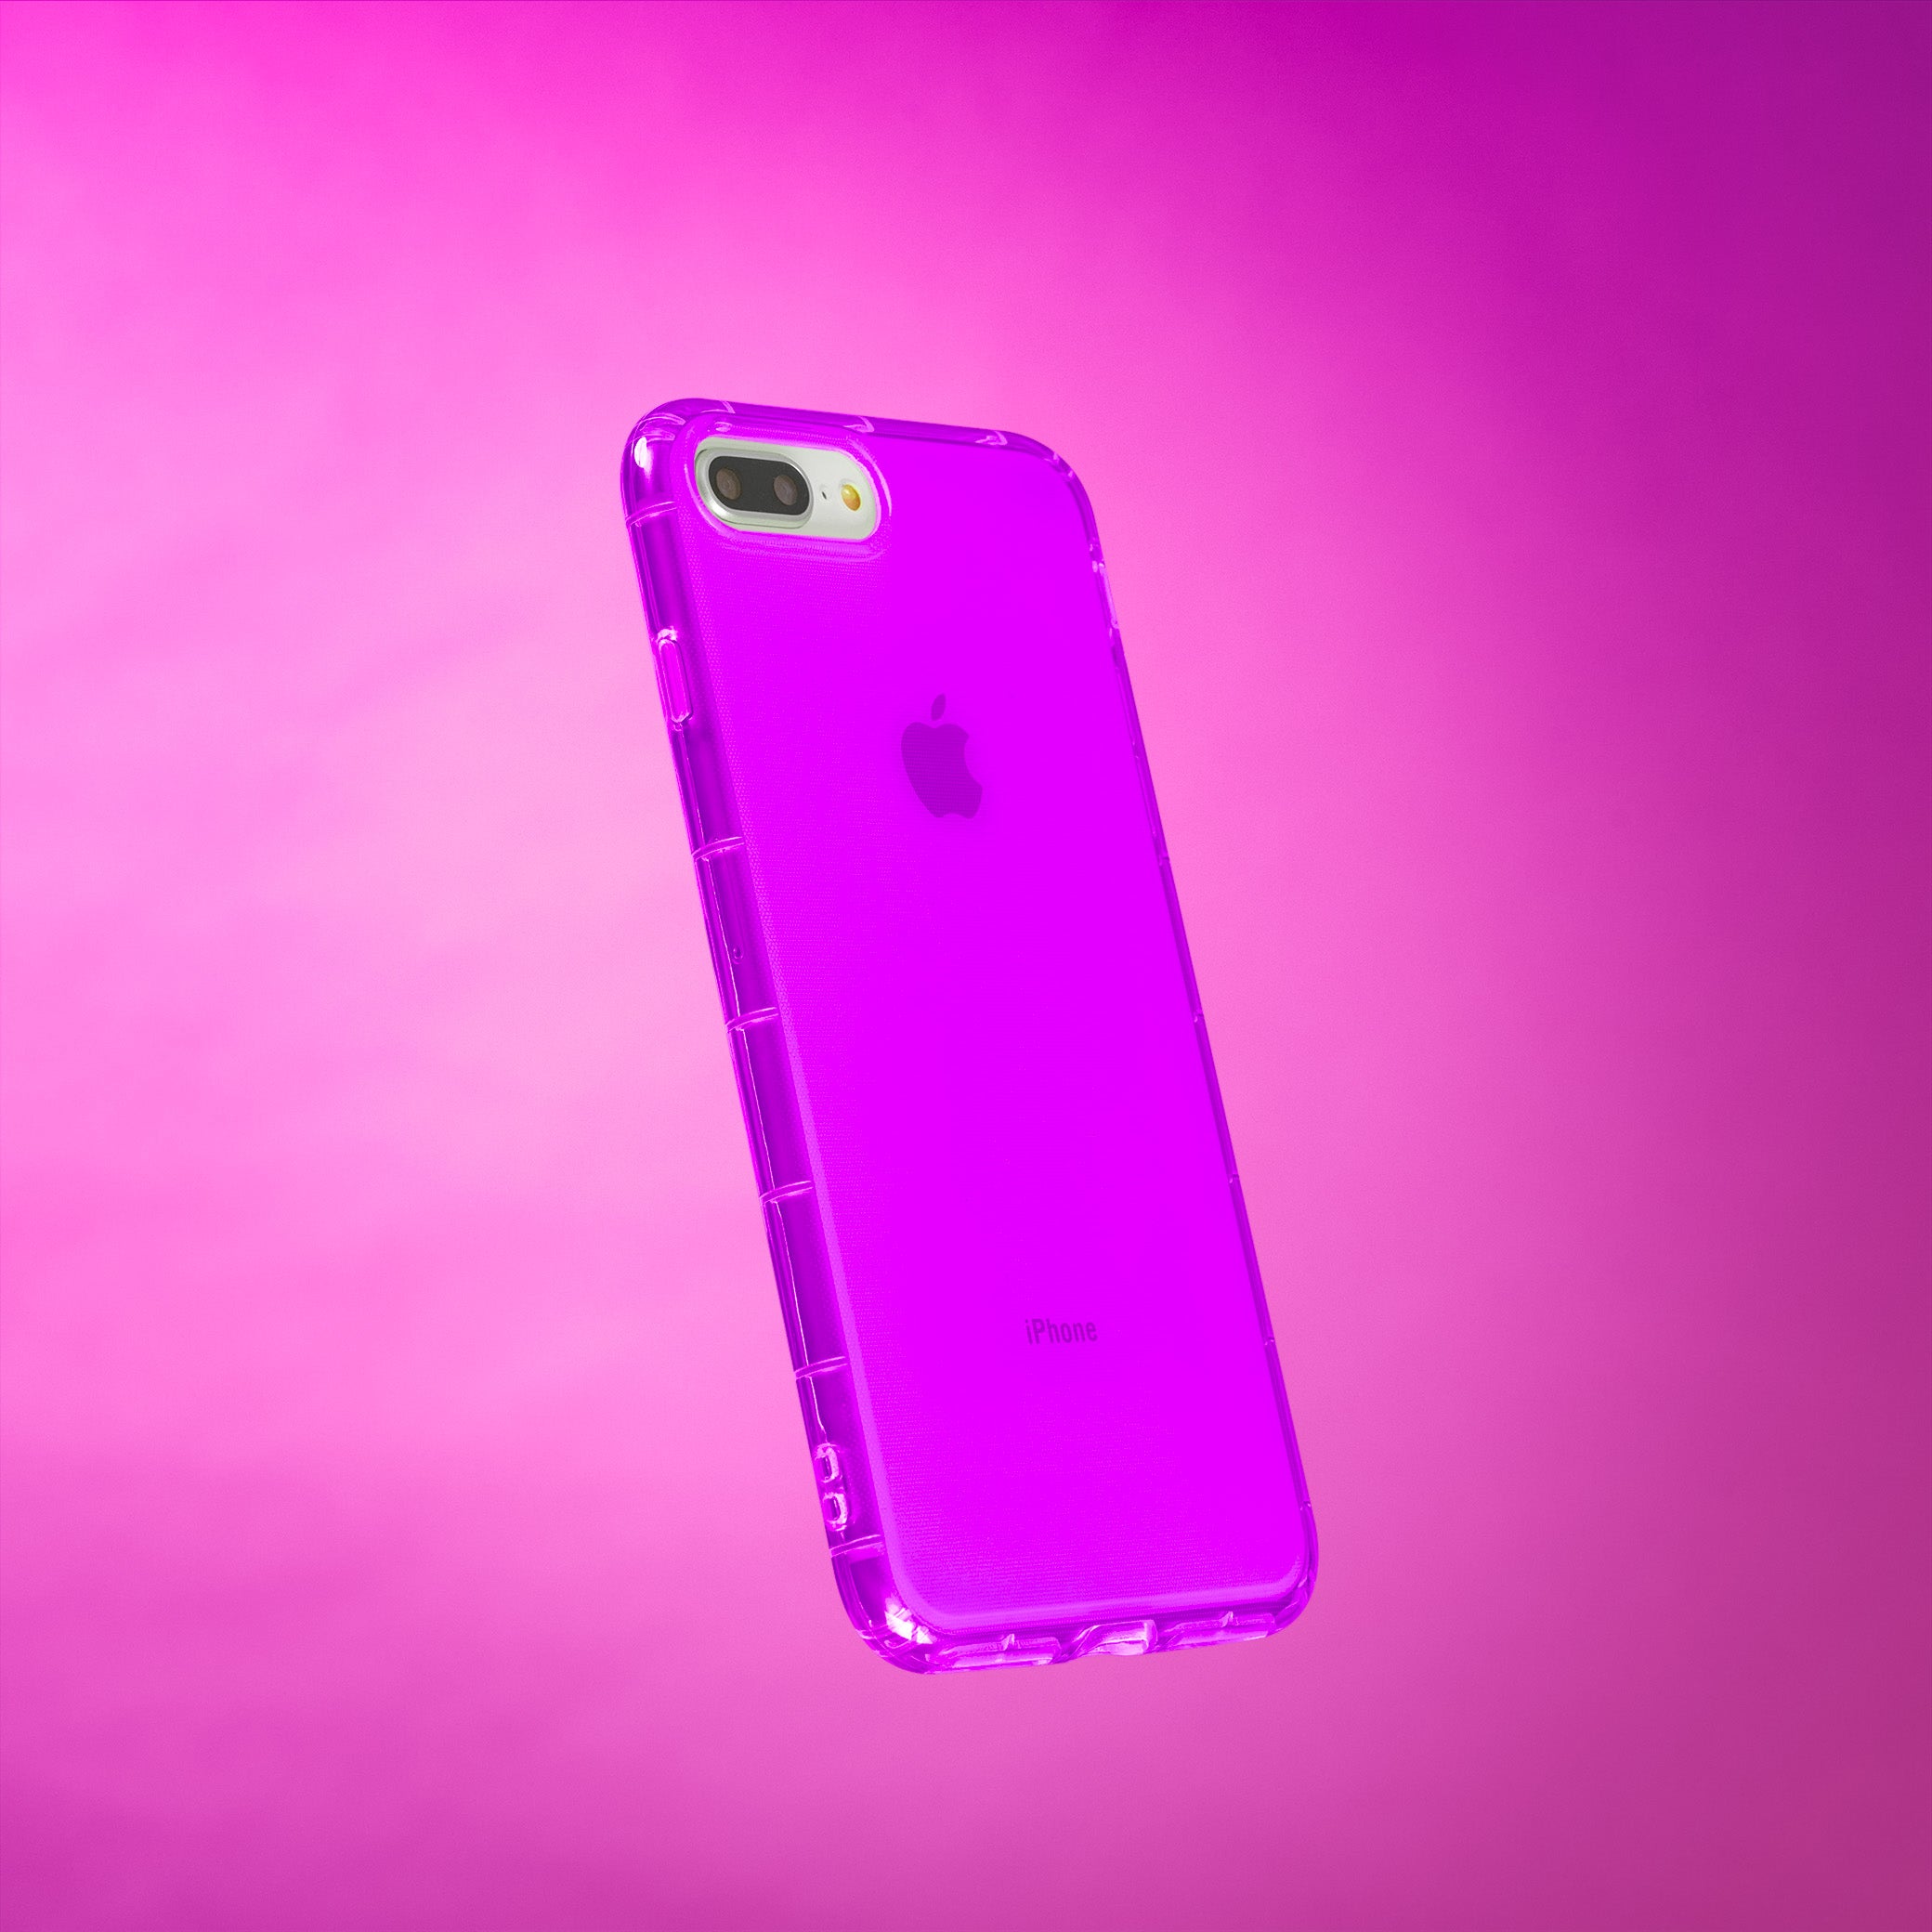 Highlighter Case for iPhone 8 Plus - Saturated Vivid Purple